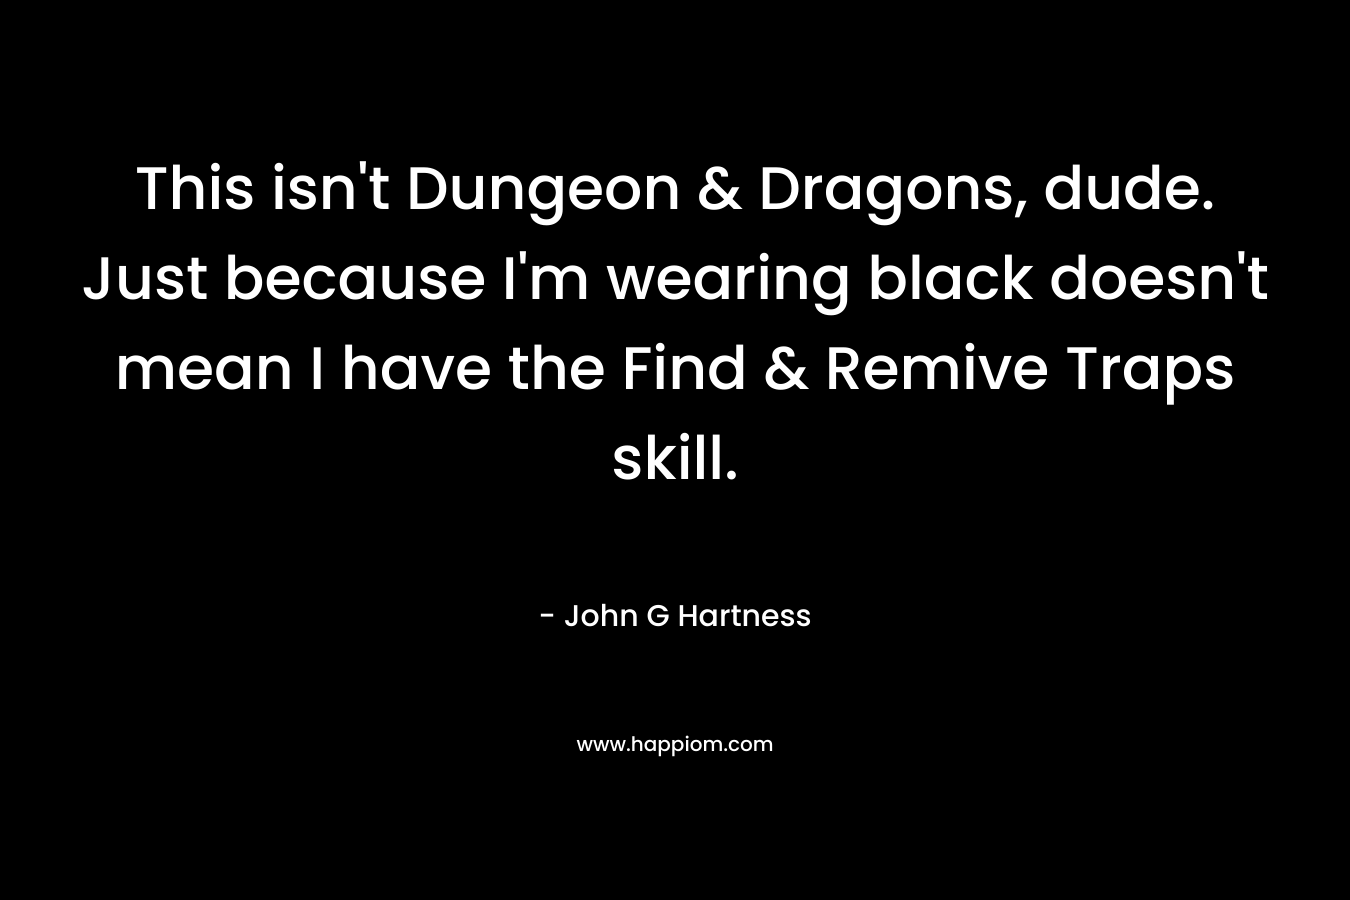 This isn’t Dungeon & Dragons, dude. Just because I’m wearing black doesn’t mean I have the Find & Remive Traps skill. – John G Hartness